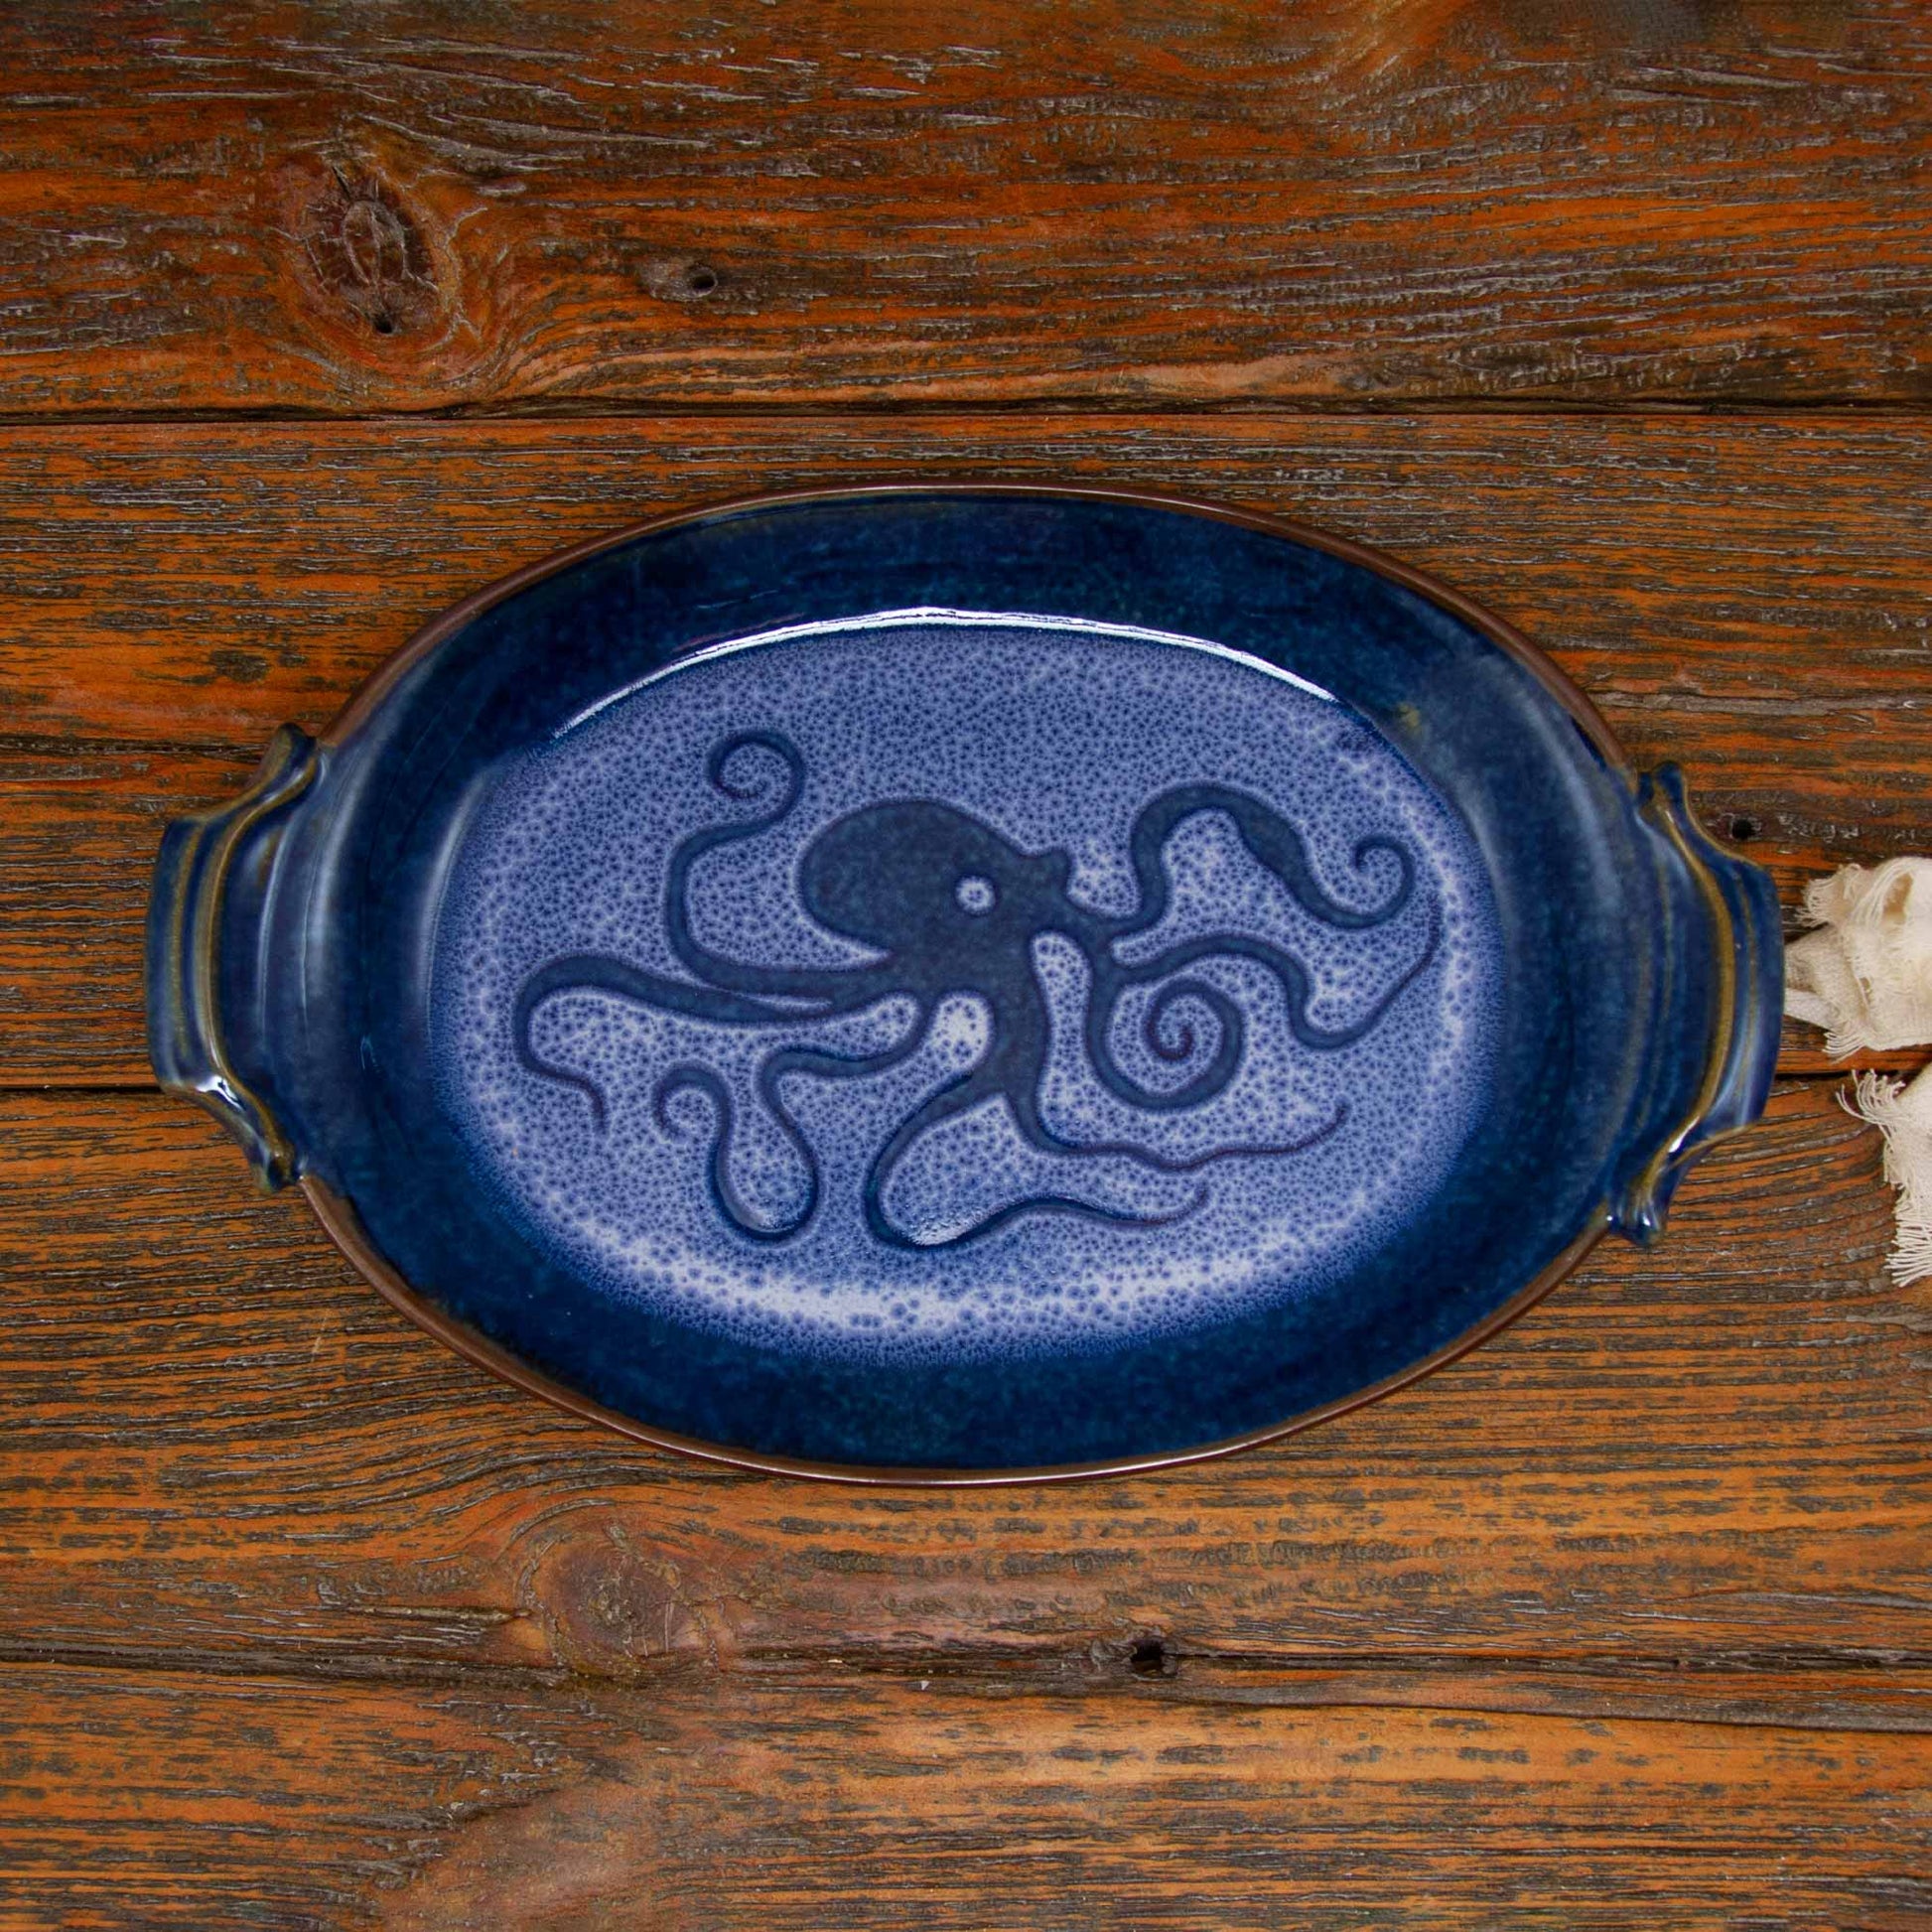 Handmade Pottery Oval Tray in Blue Octopus pattern made by Georgetown Pottery in Maine